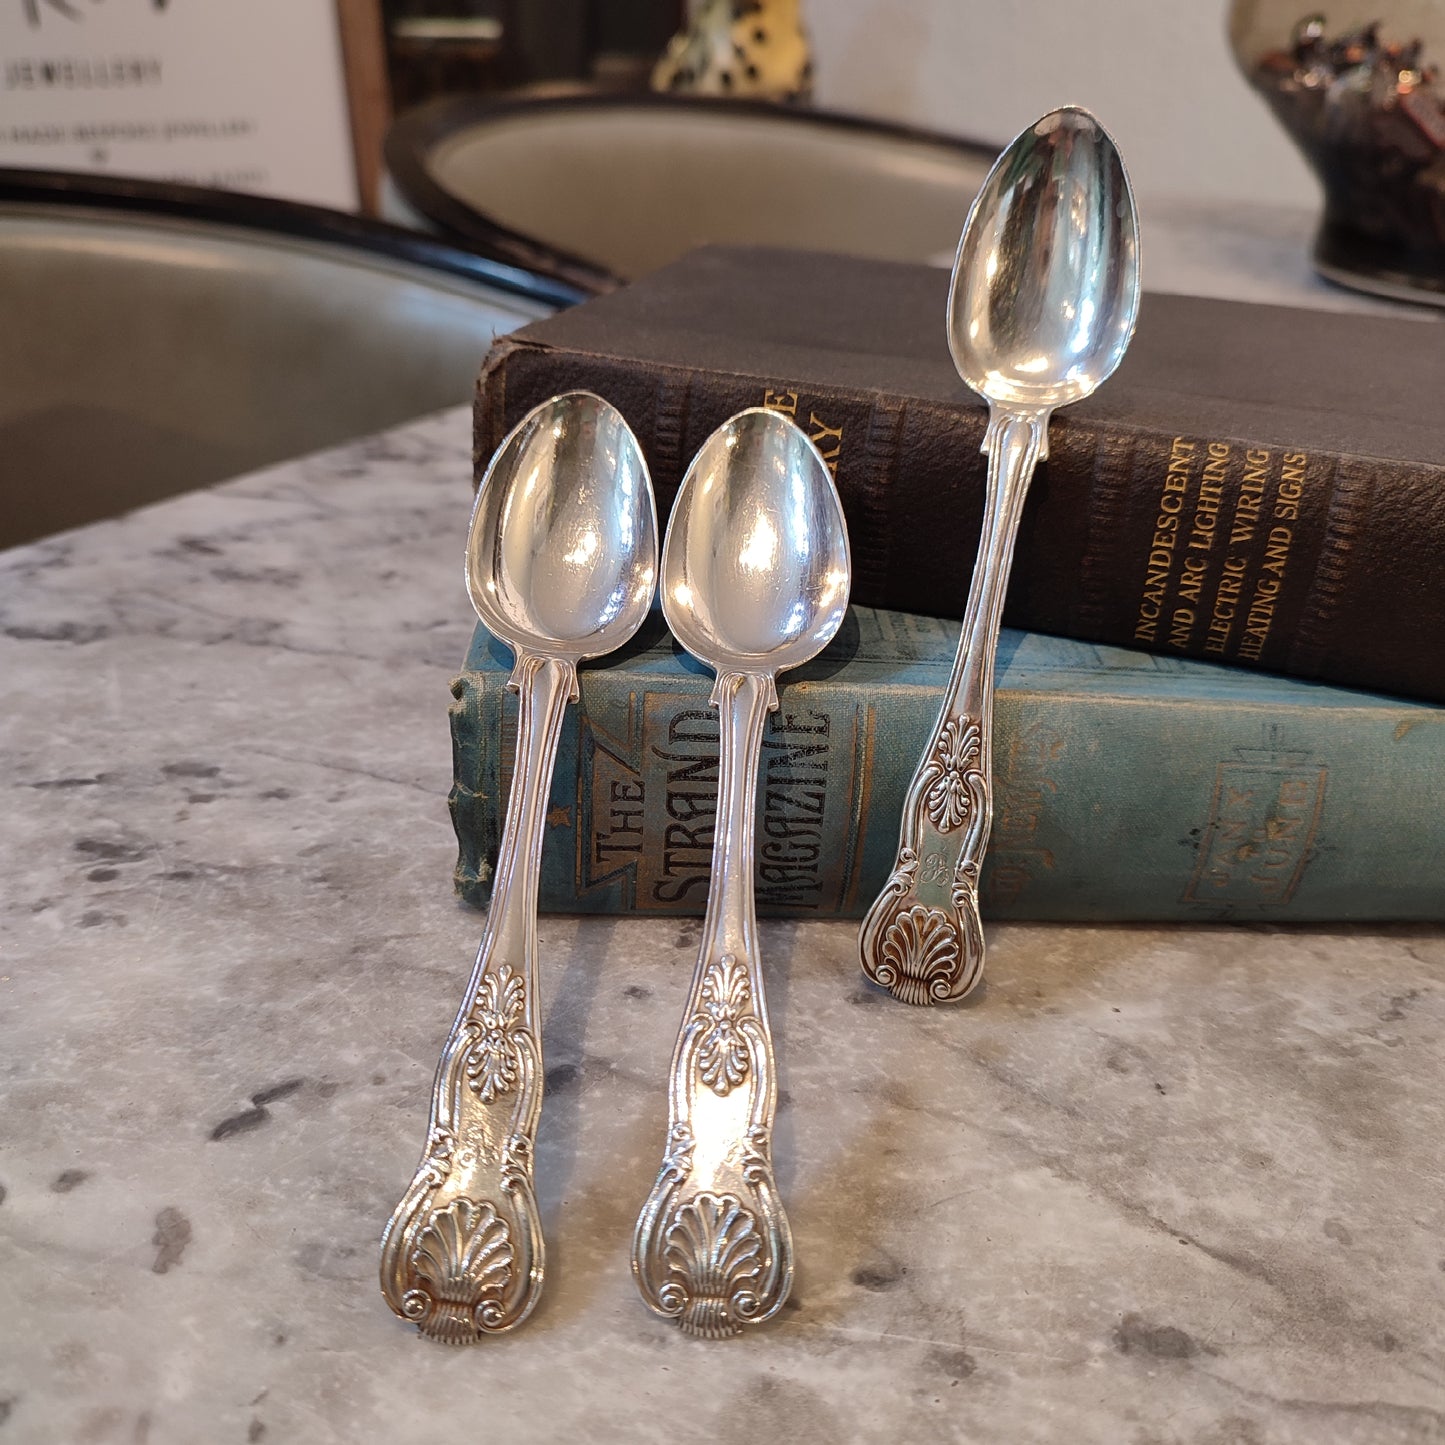 c.1839 Antique Hallmarked Silver Early Victorian Teaspoons by John and Henry Lias